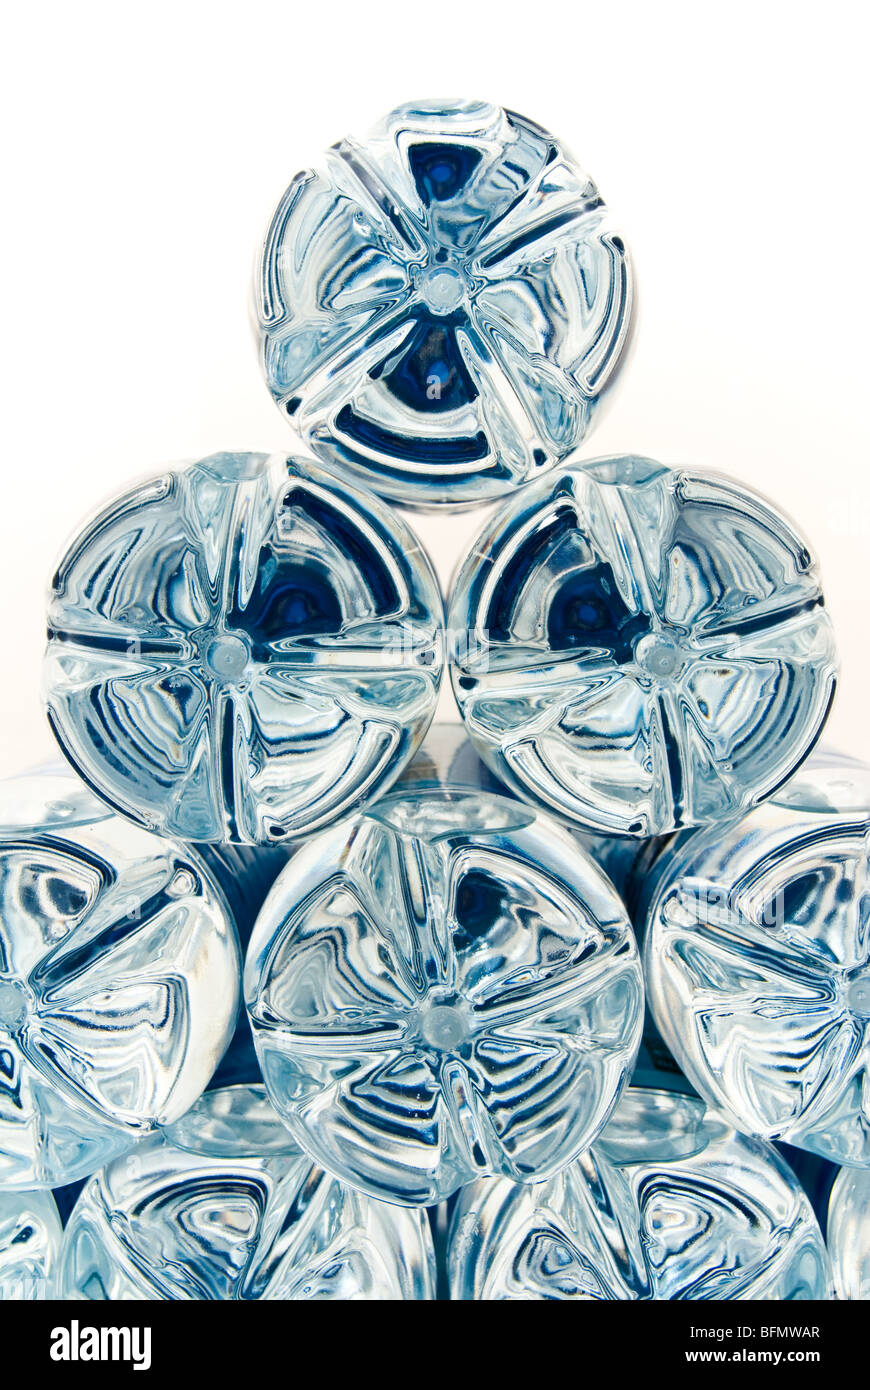 Moulded plastic bottle bottoms with a blue reflection from labels in a triangle formation Stock Photo